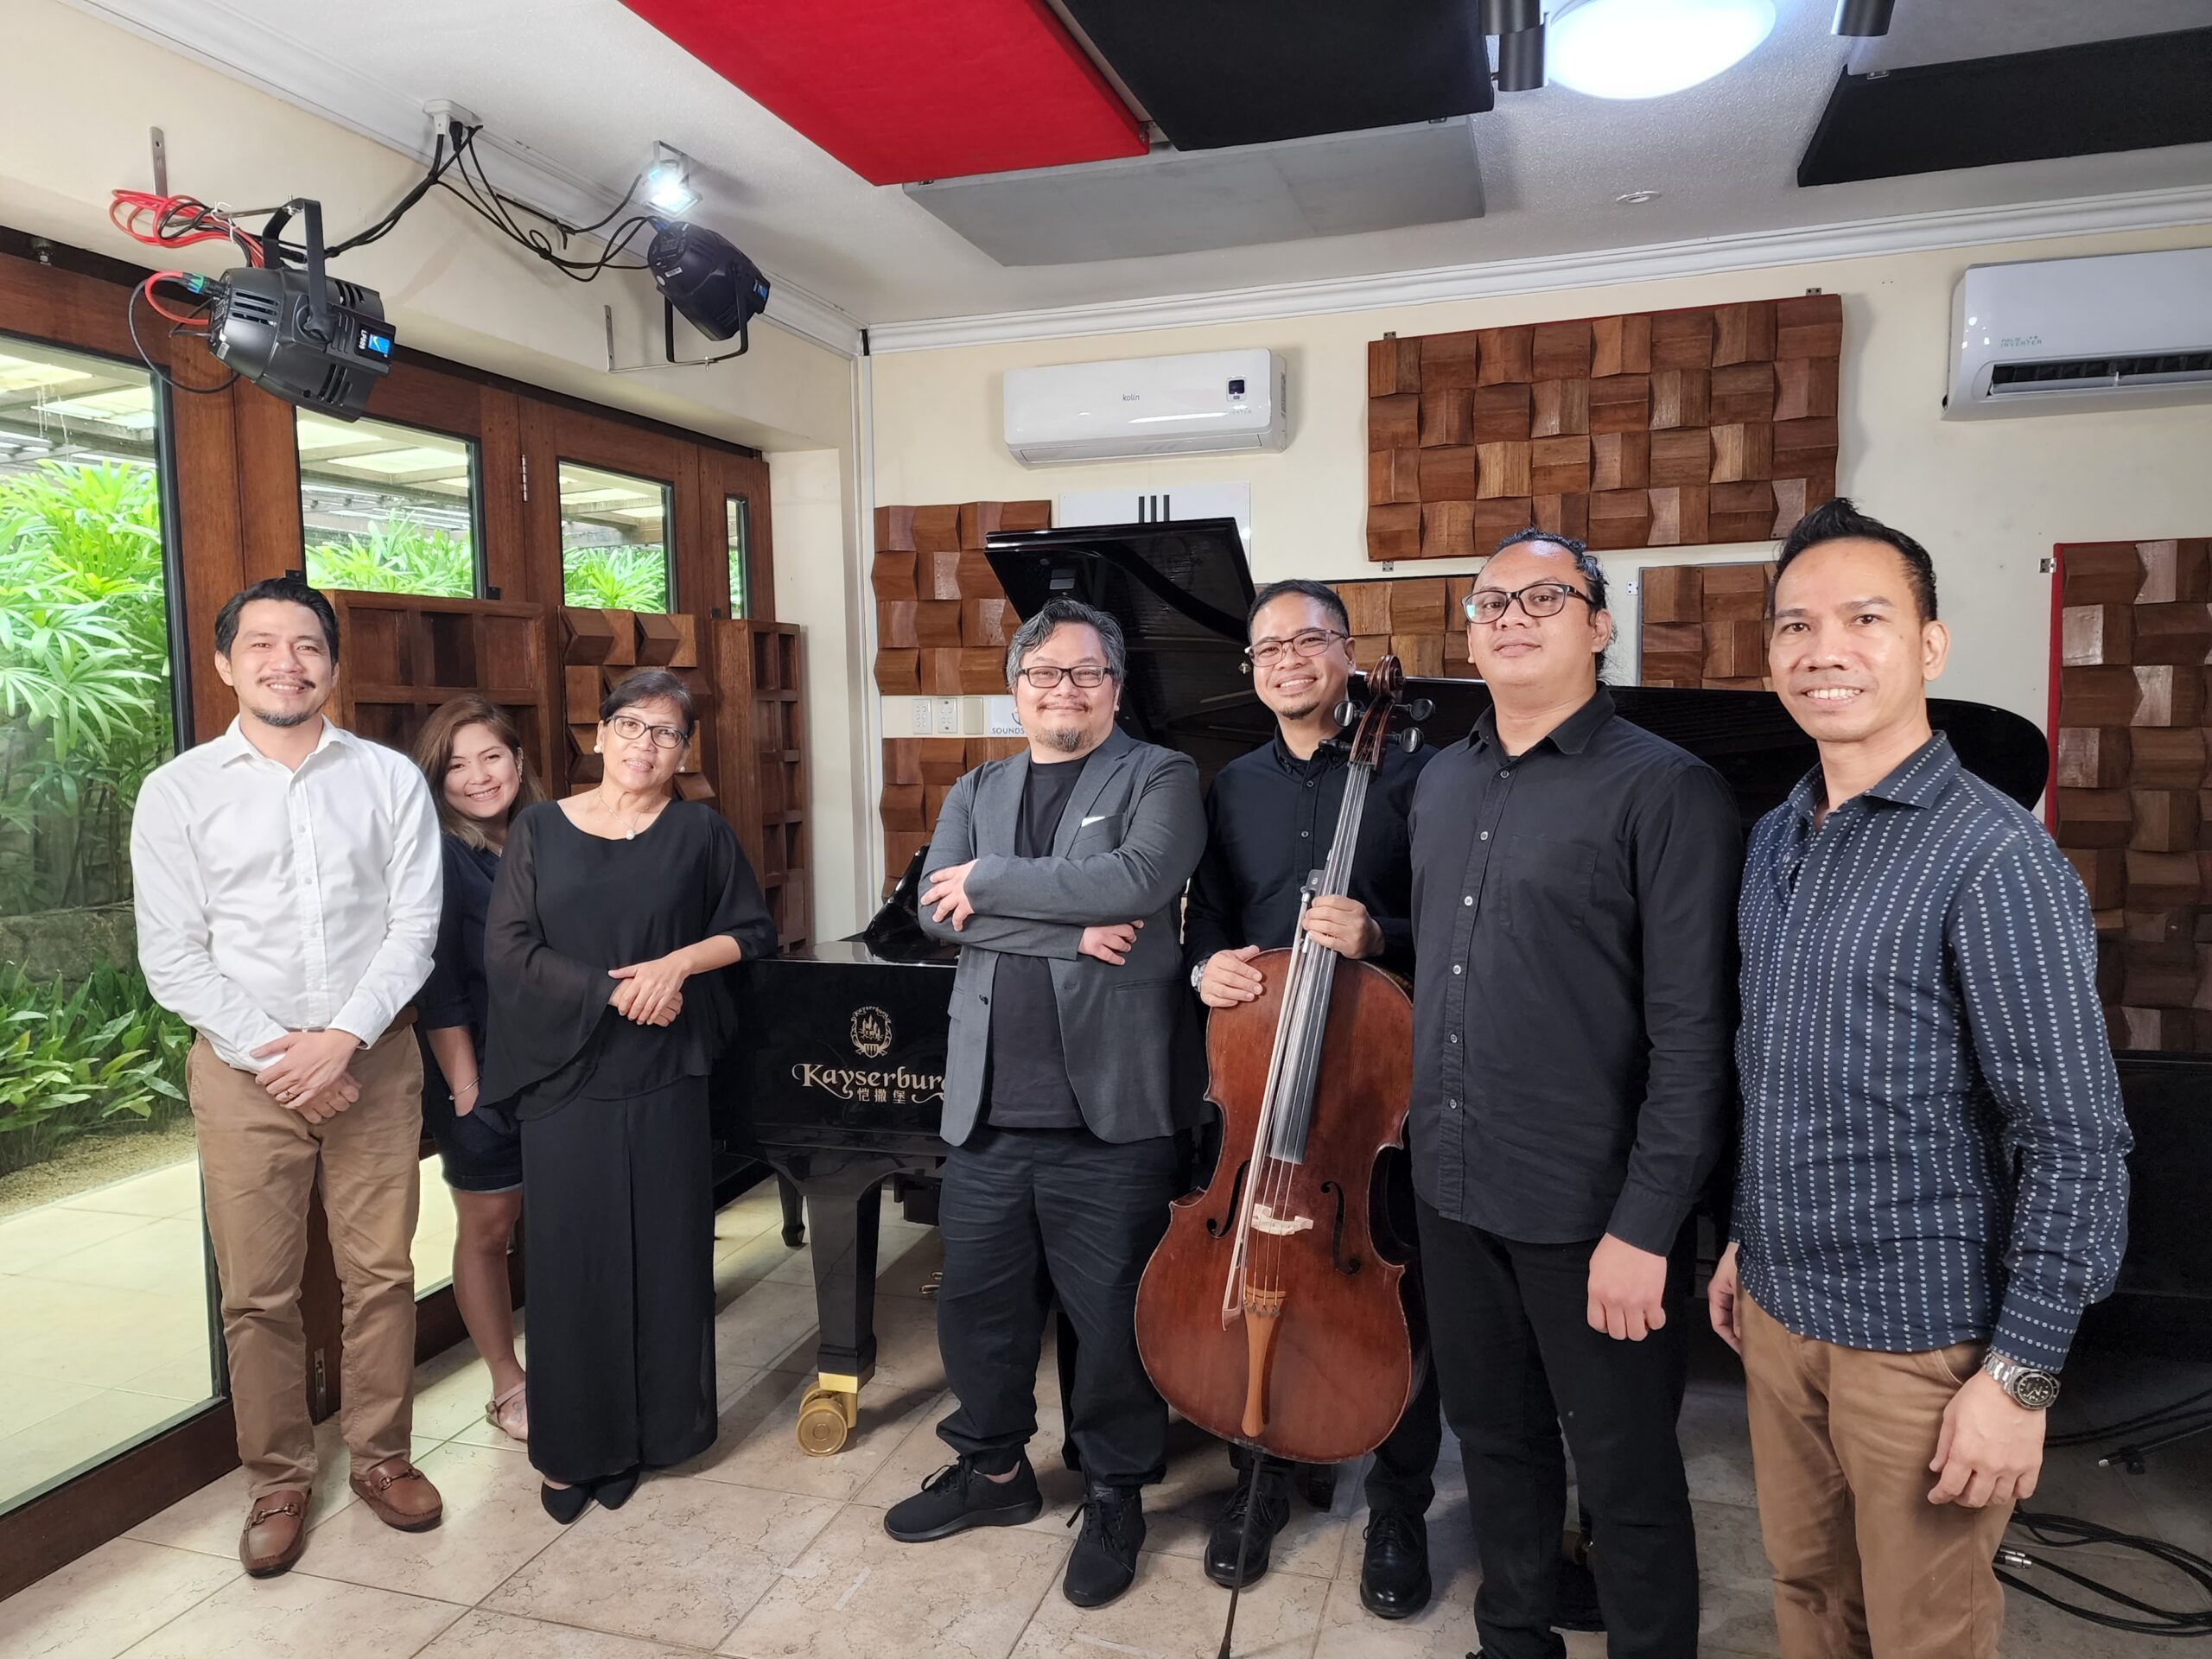 NCCA awards Cagayan de Oro composer grant to record classical music works